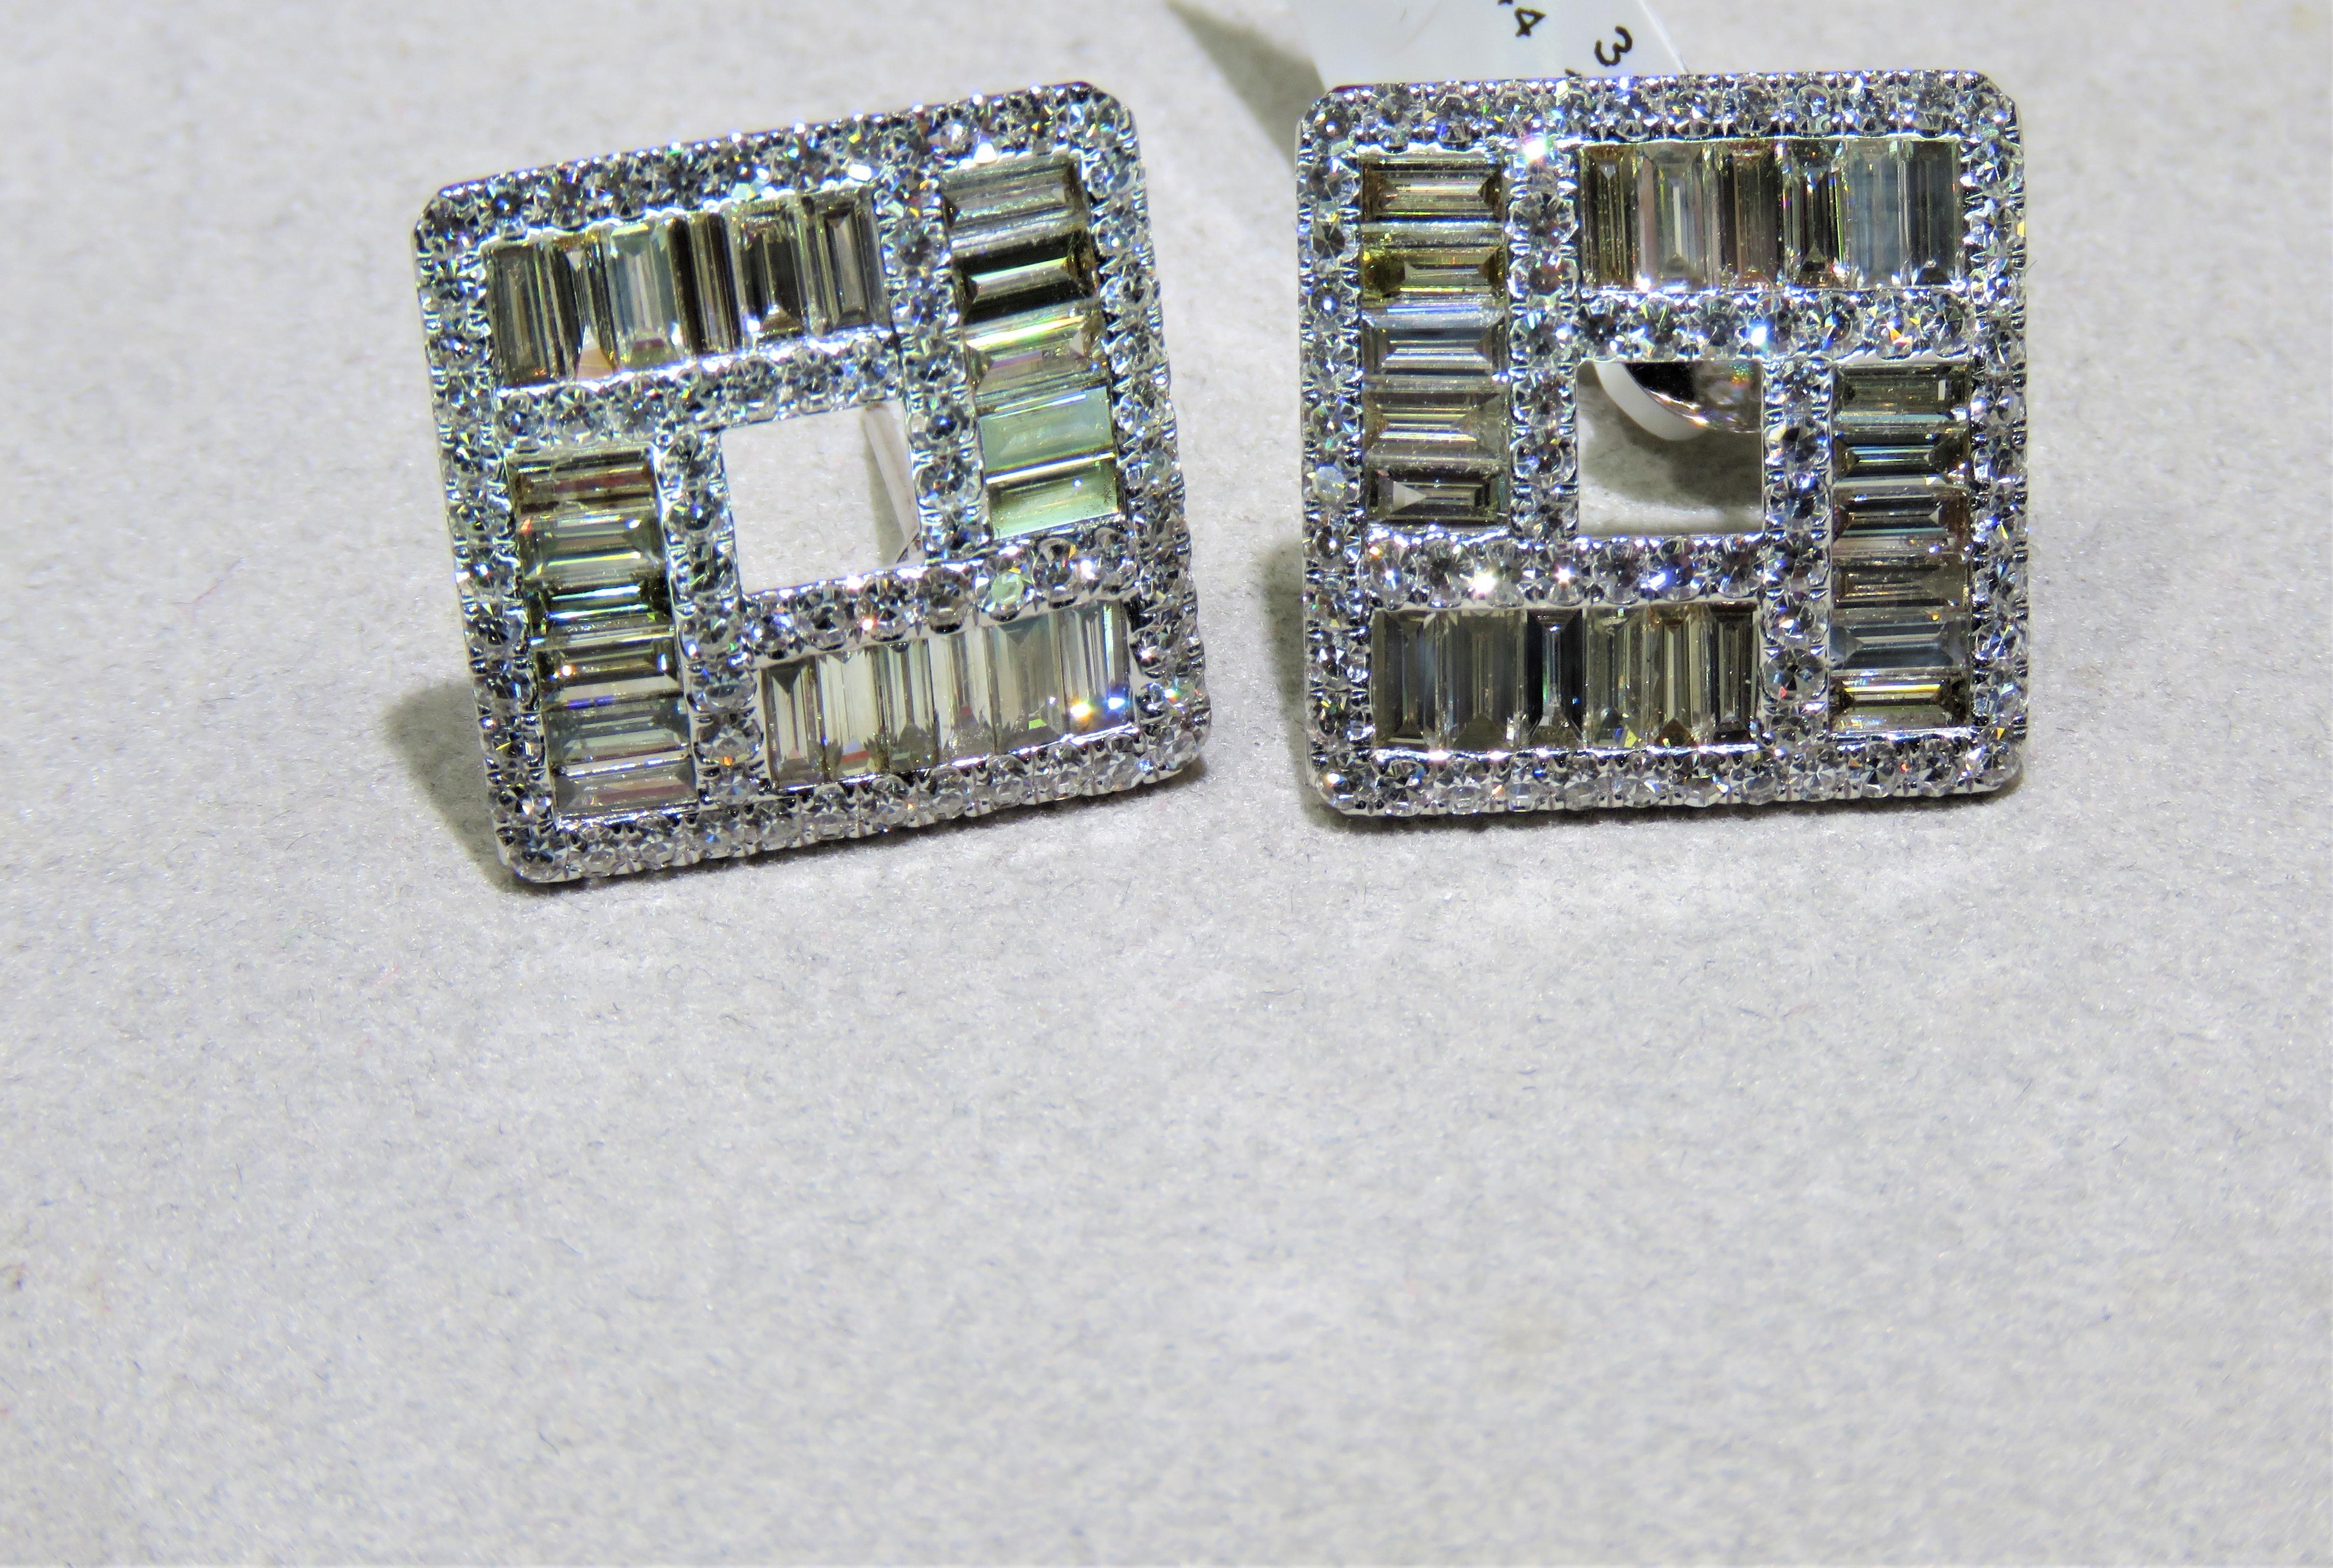 The Following Item we are offering are these Extremely Rare Beautiful 18KT Gold Fine Large Fancy Baguette Cut Trillion White Diamond Earrings. Each Earring features Rare Gorgeous Glittering Fancy Large Baguette Diamonds adorned with Sparkling White